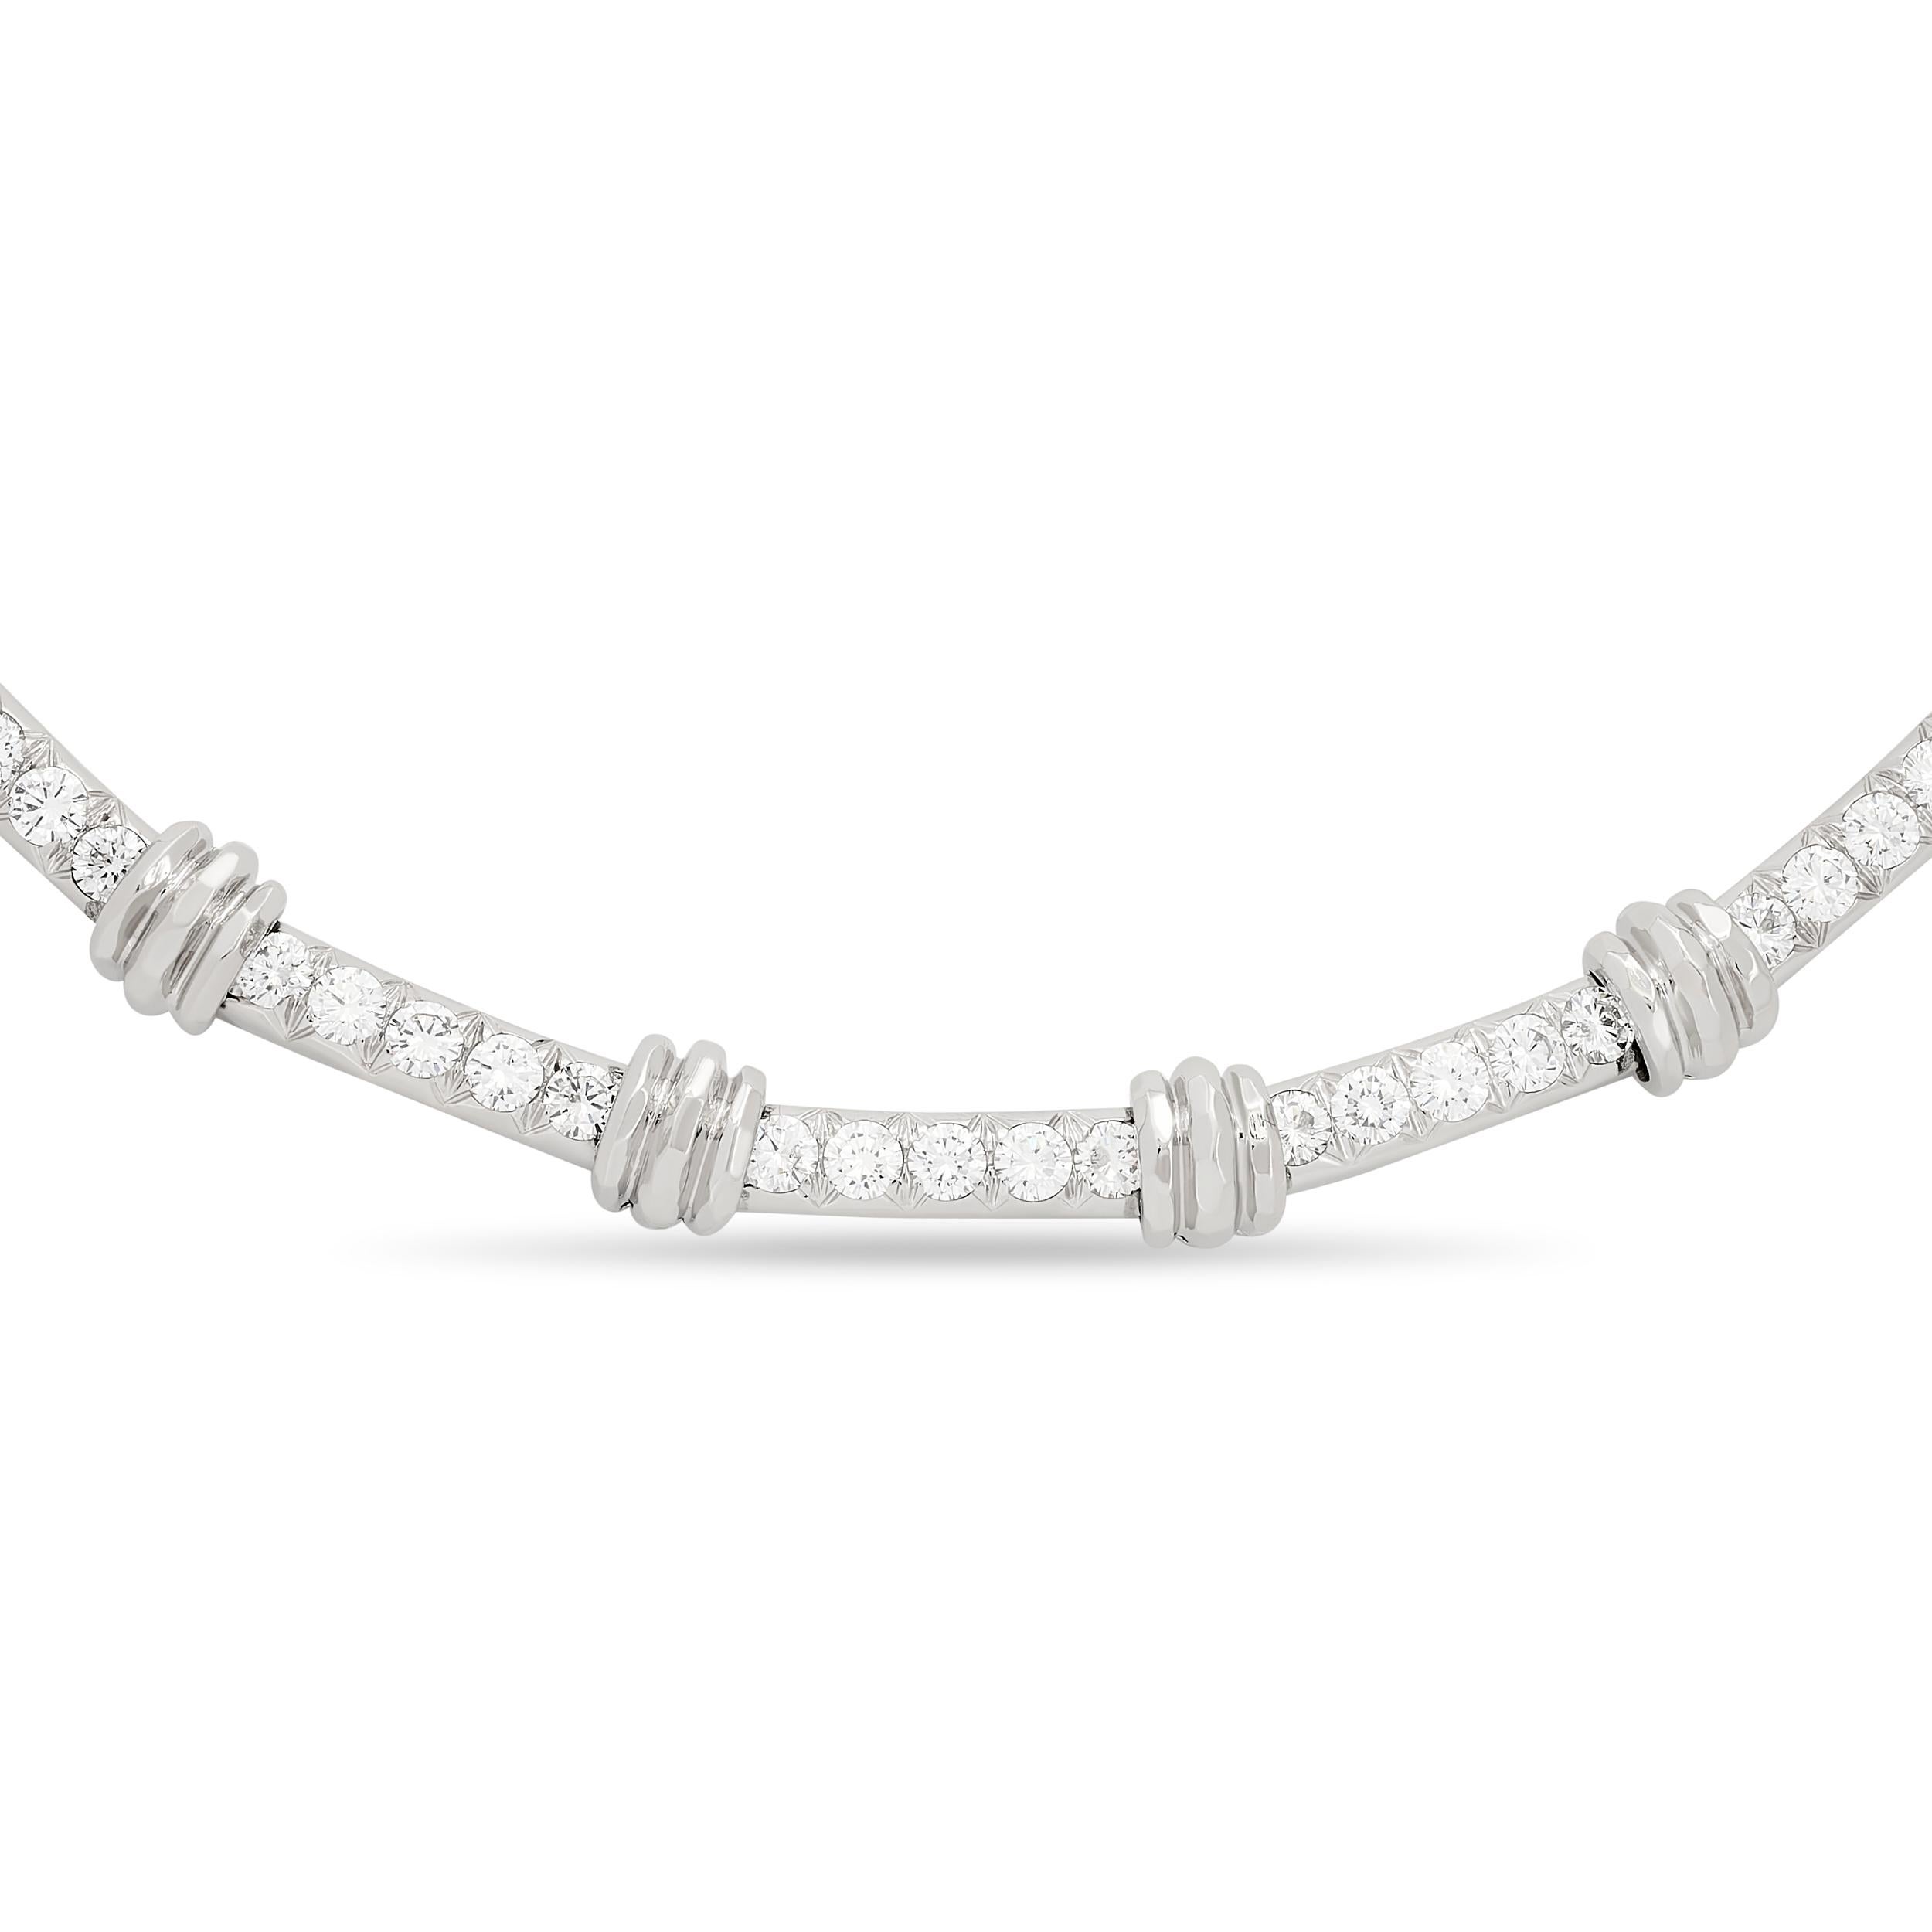 An elegant Henry Dunay necklace with a touch of mesmerizing brilliance. This listing is for the necklace only; the matching bracelet is a separate listing.

The necklace, made in platinum, has 25 round brilliant diamonds that weigh approximately